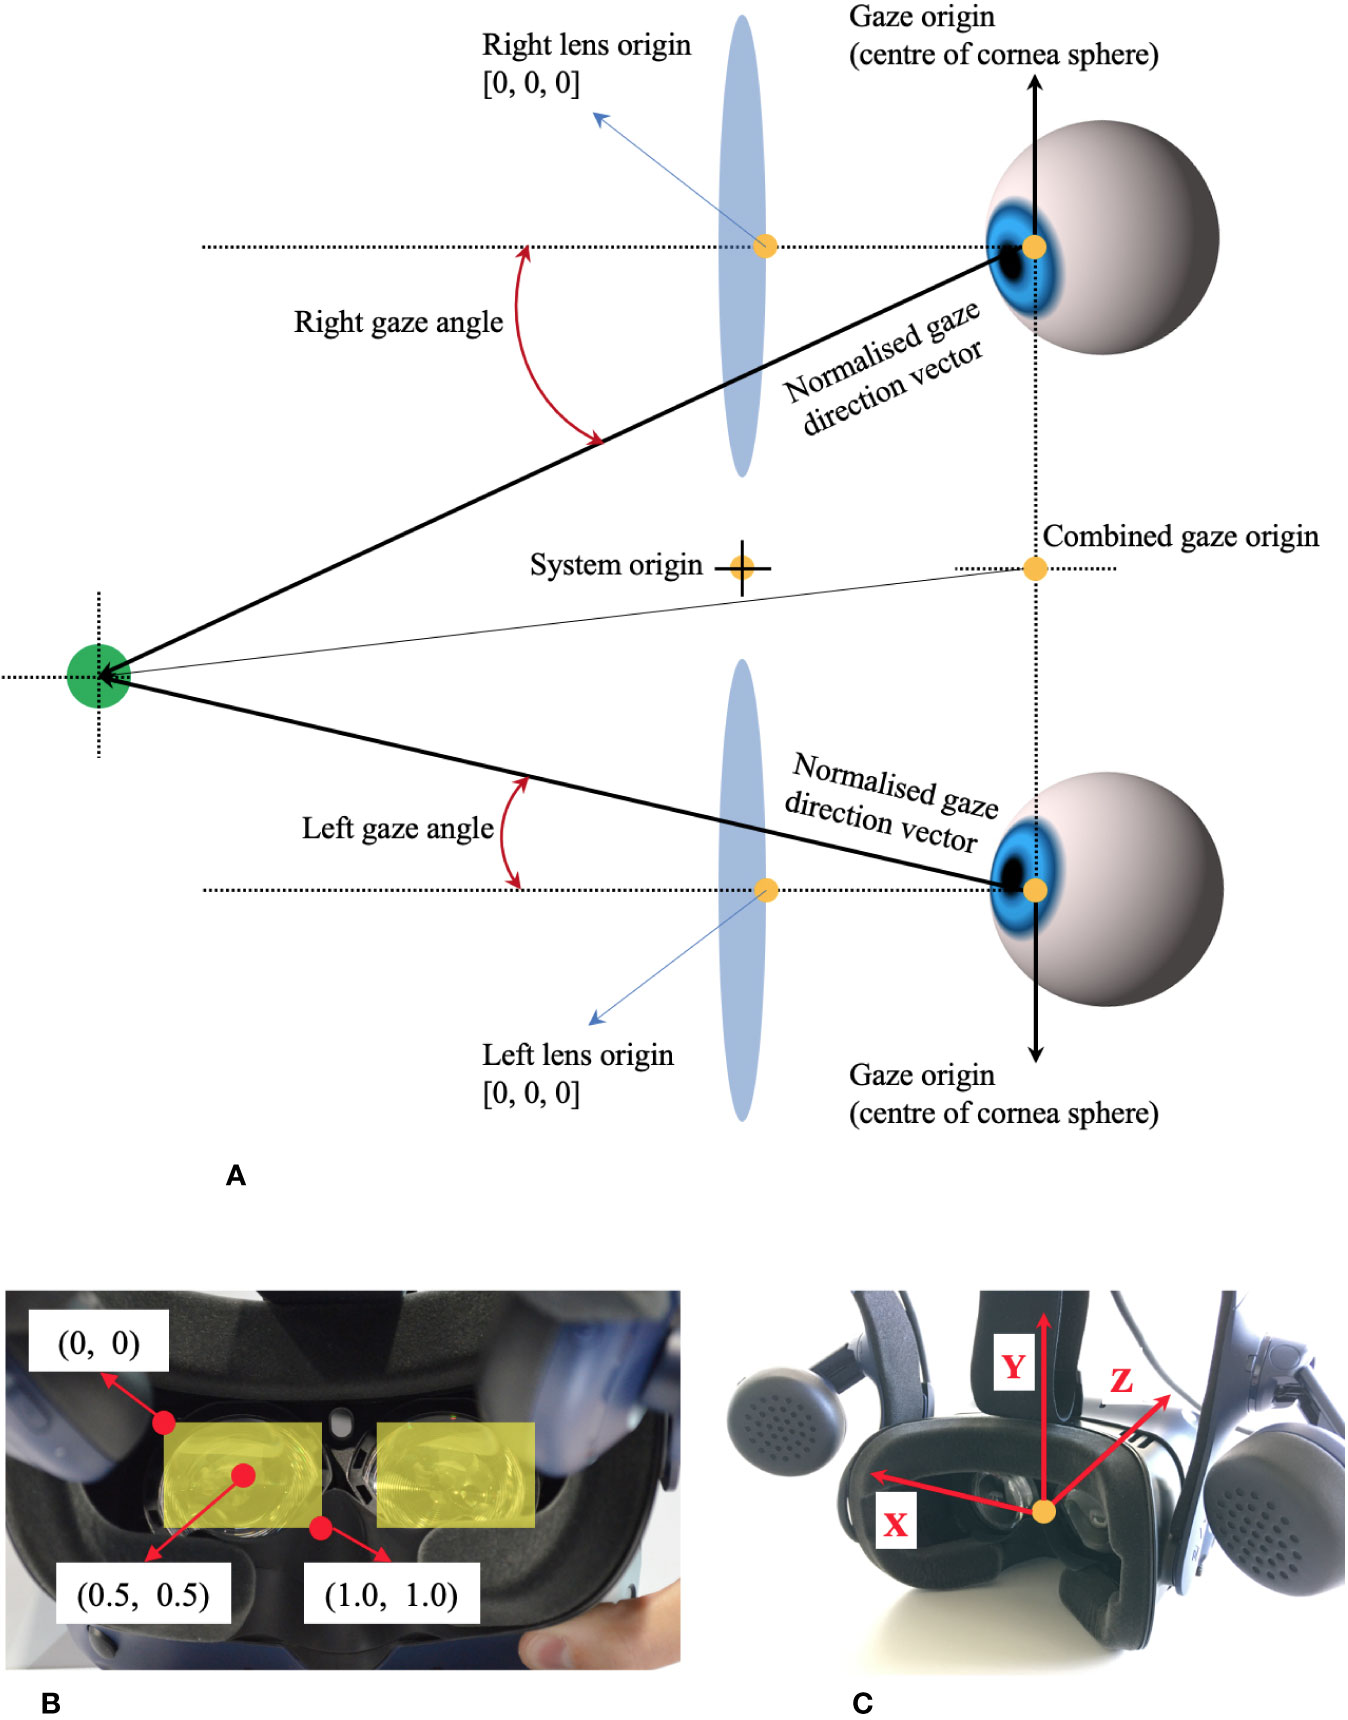 Frontiers | Saccadic Movements With Head-Mounted Display Virtual Reality Technology